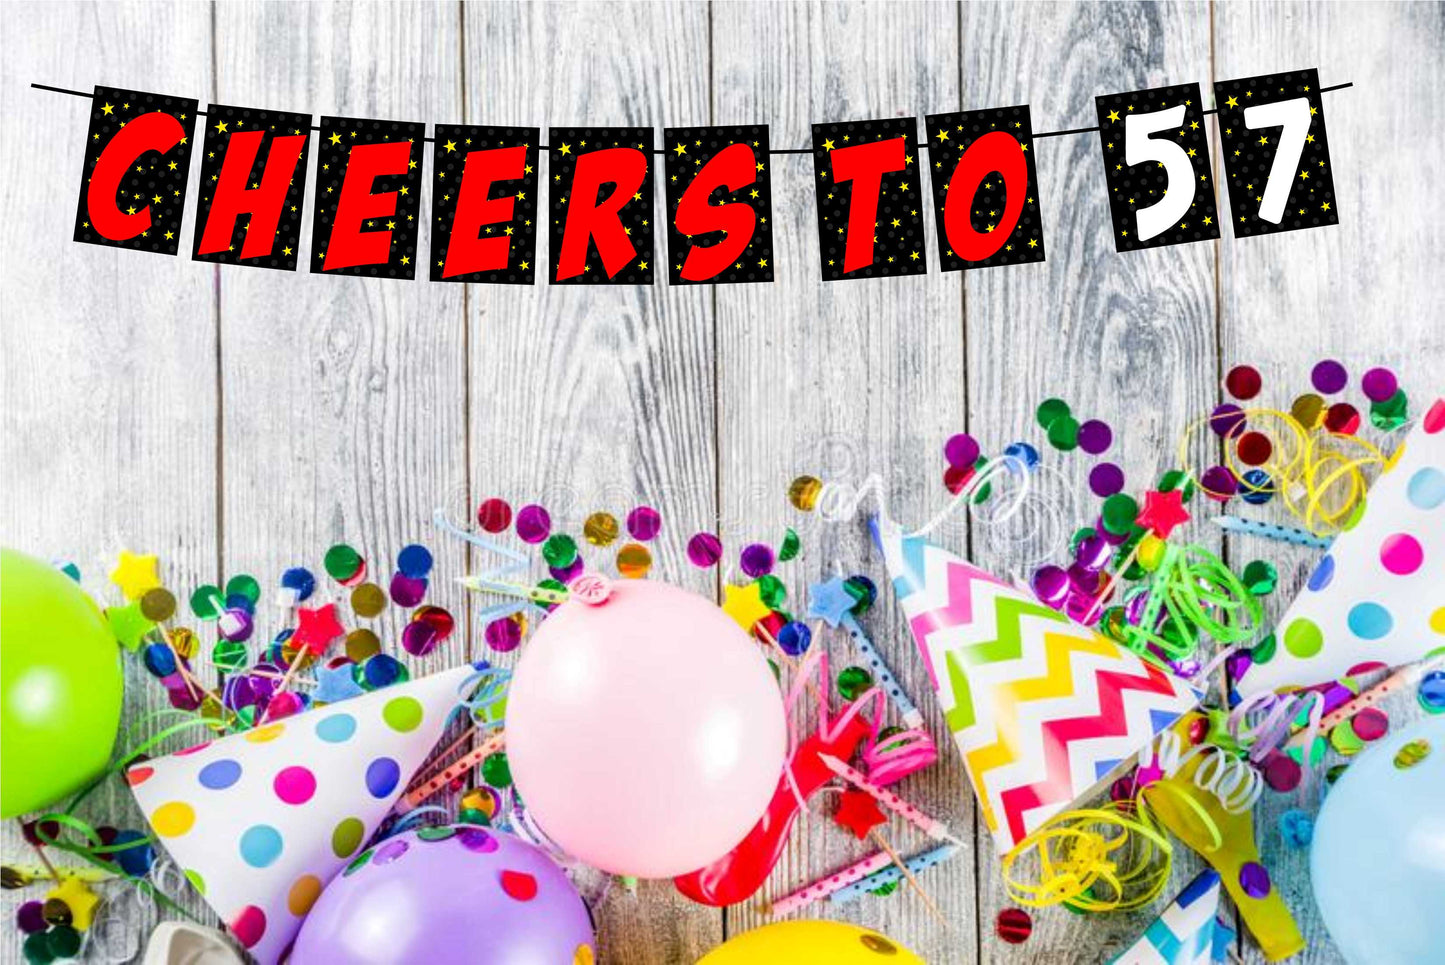 Cheers to 57 Birthday Banner for Photo Shoot Backdrop and Theme Party